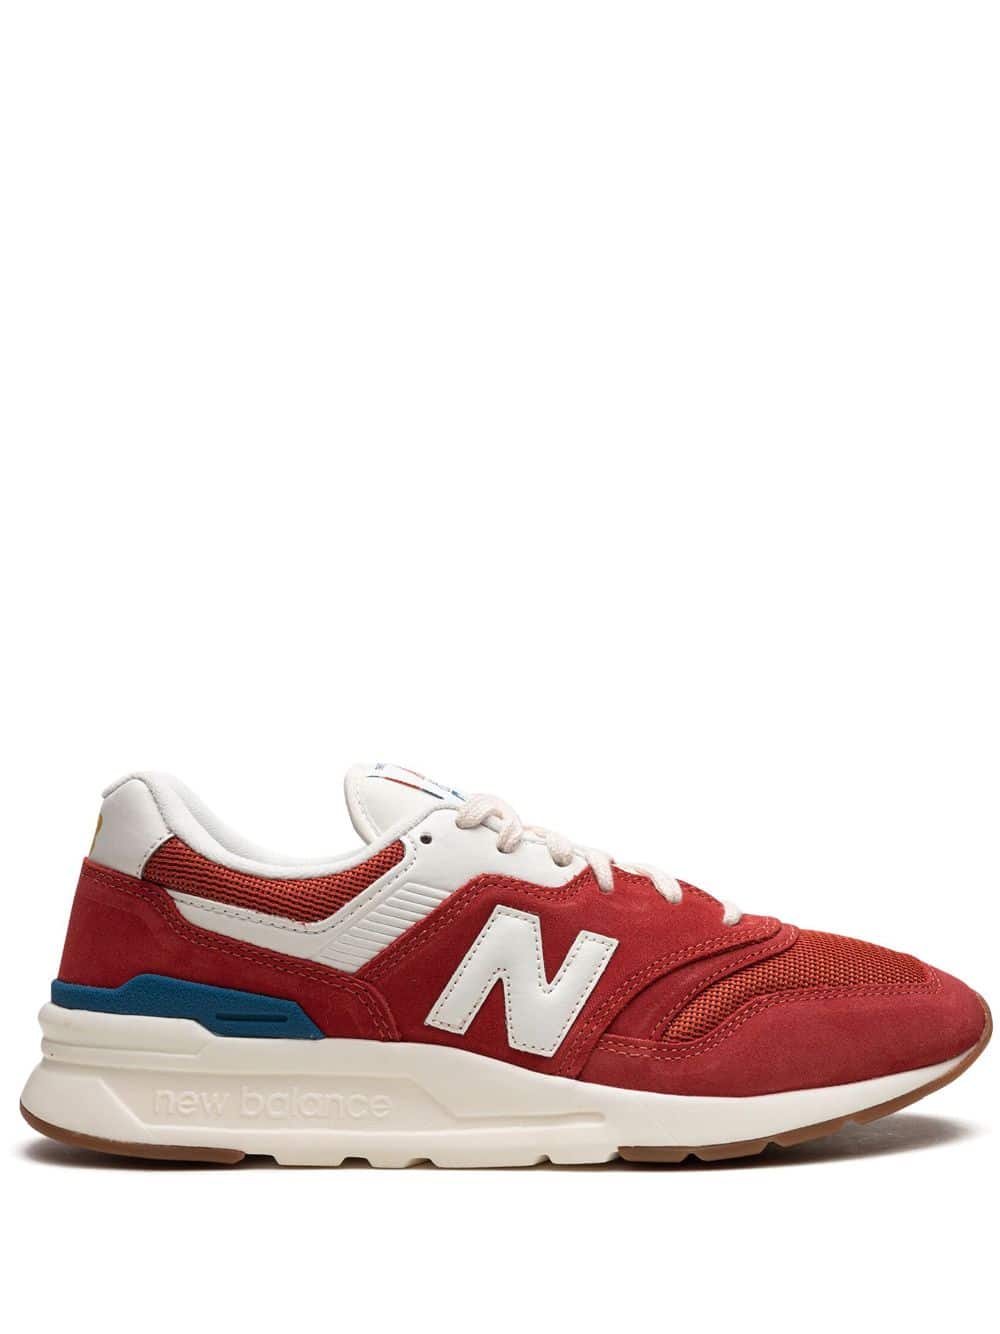 New Balance "997 ""Team Red/White/Blue"" low-top sneakers" - Rood